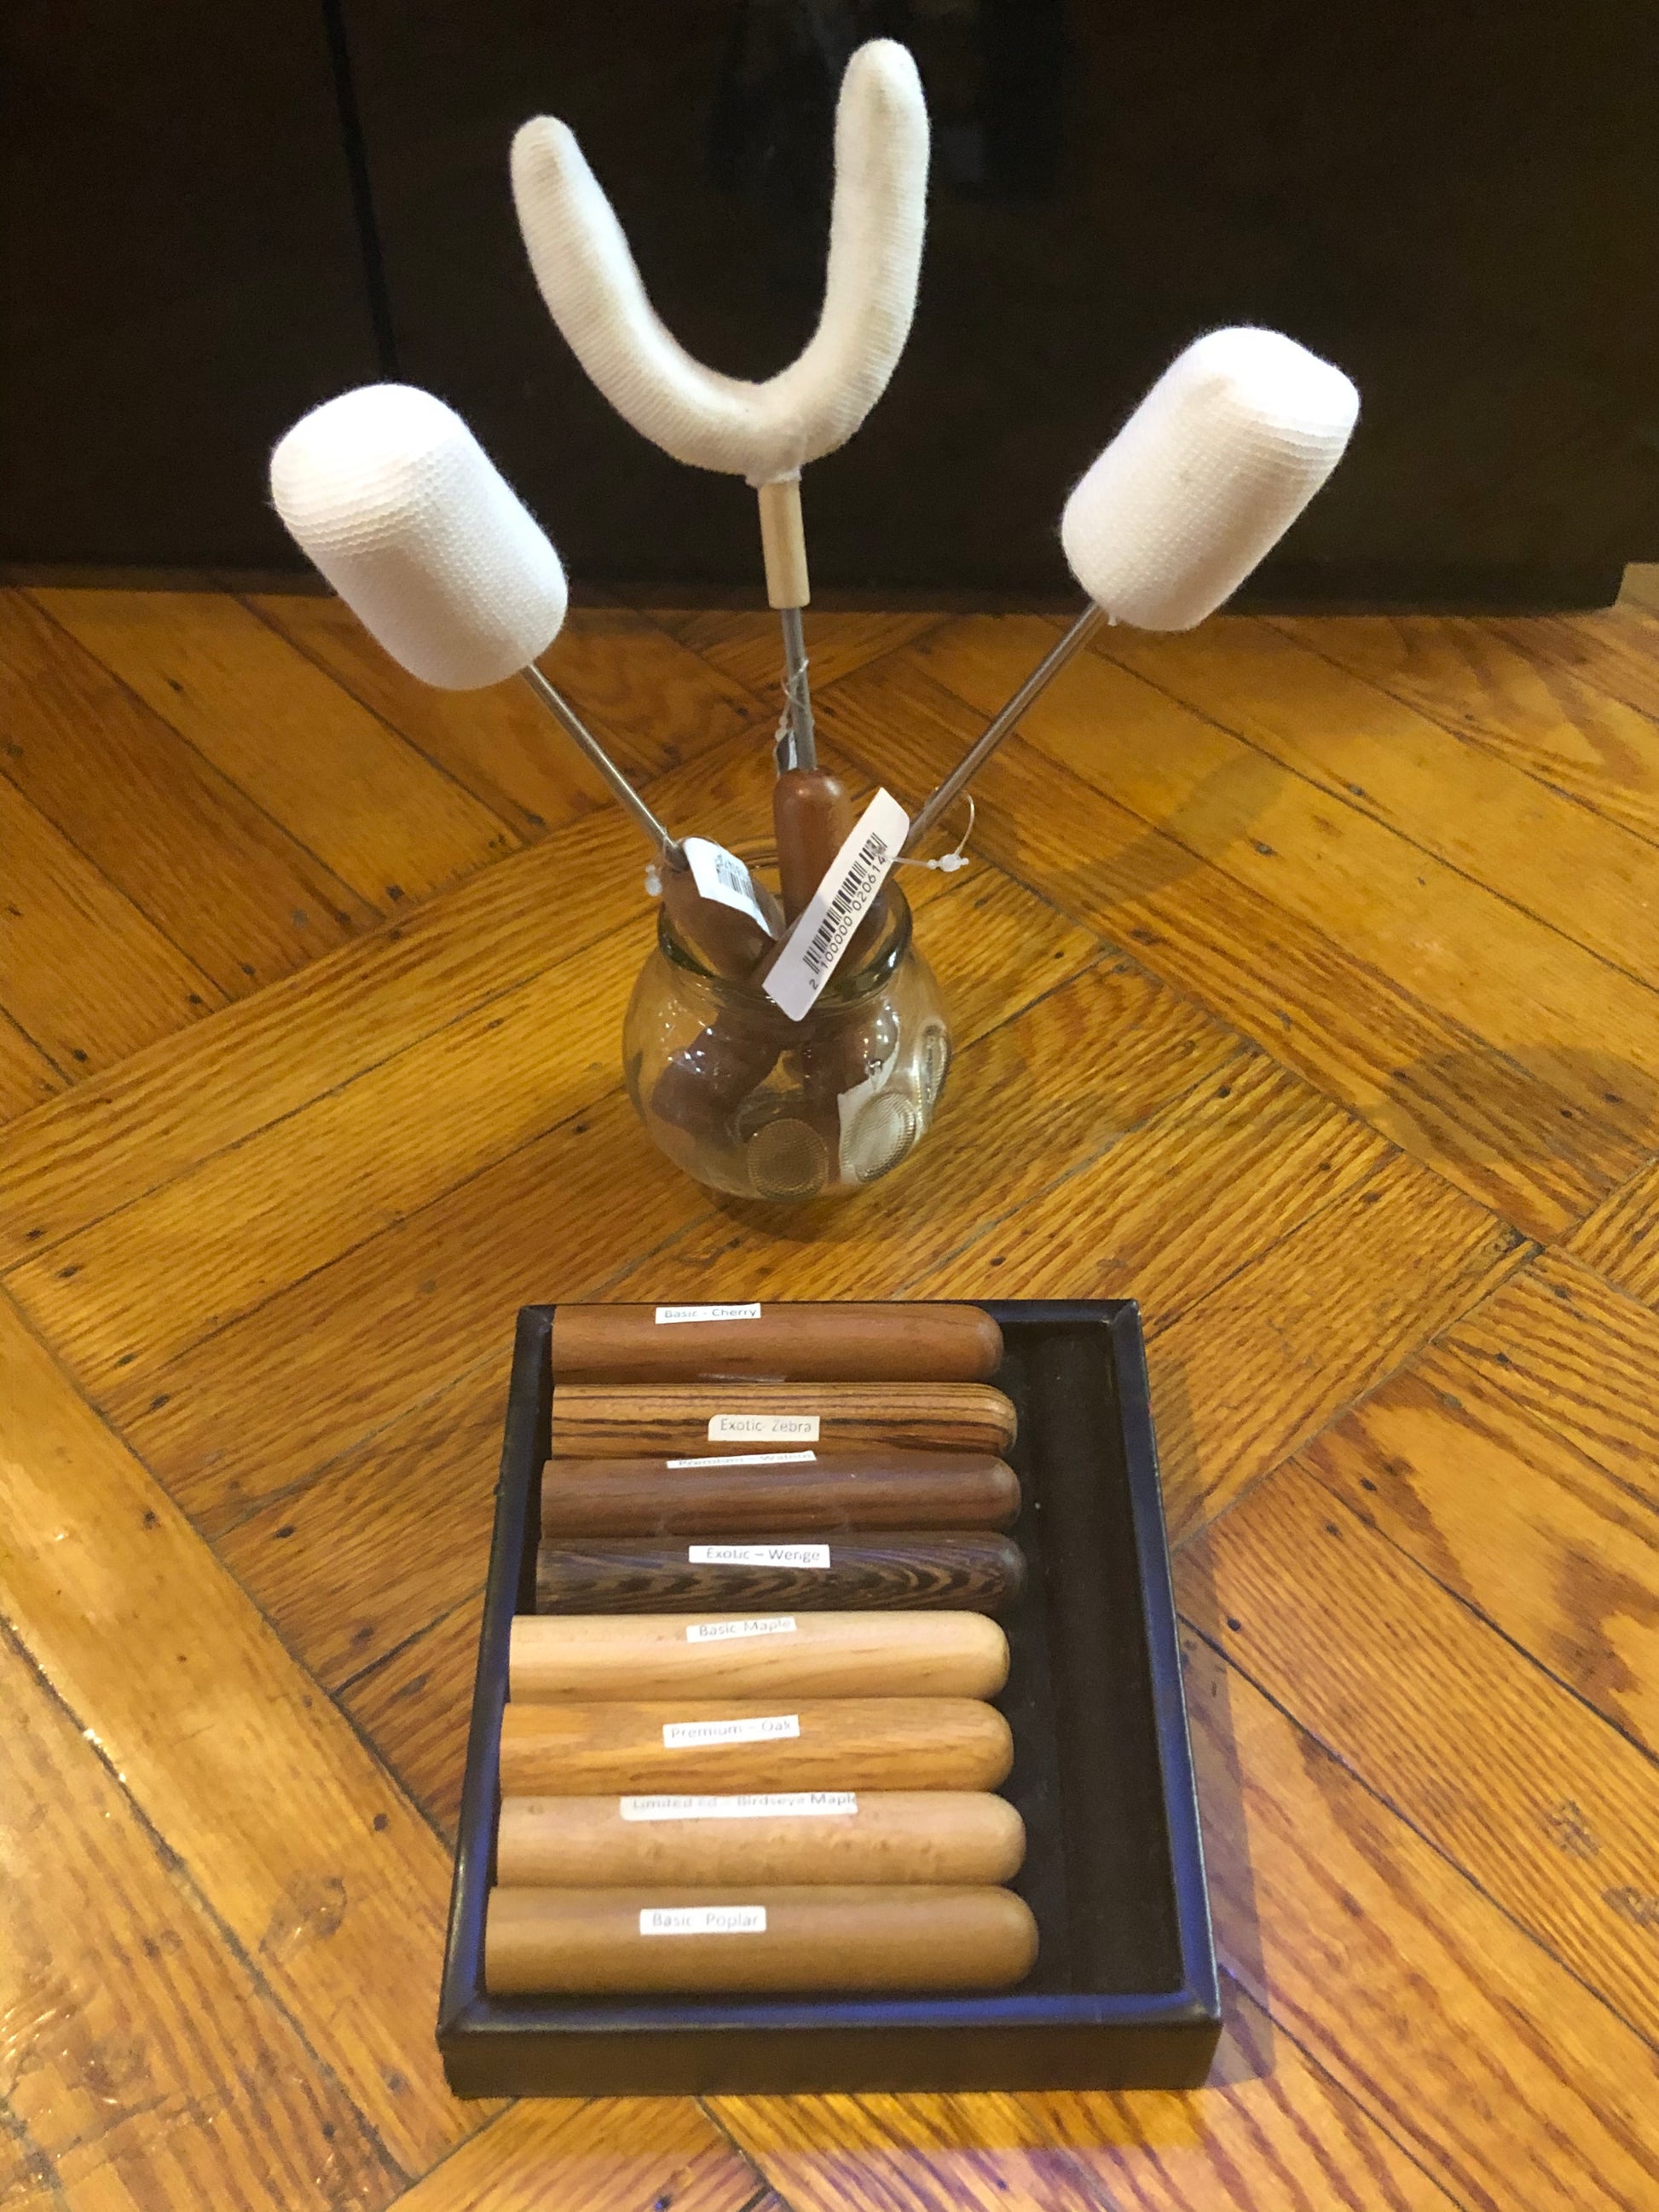 Three Fire Massage Torches sitting upright in a fire cupping glass. There is a box with several wood handles displayed inside.